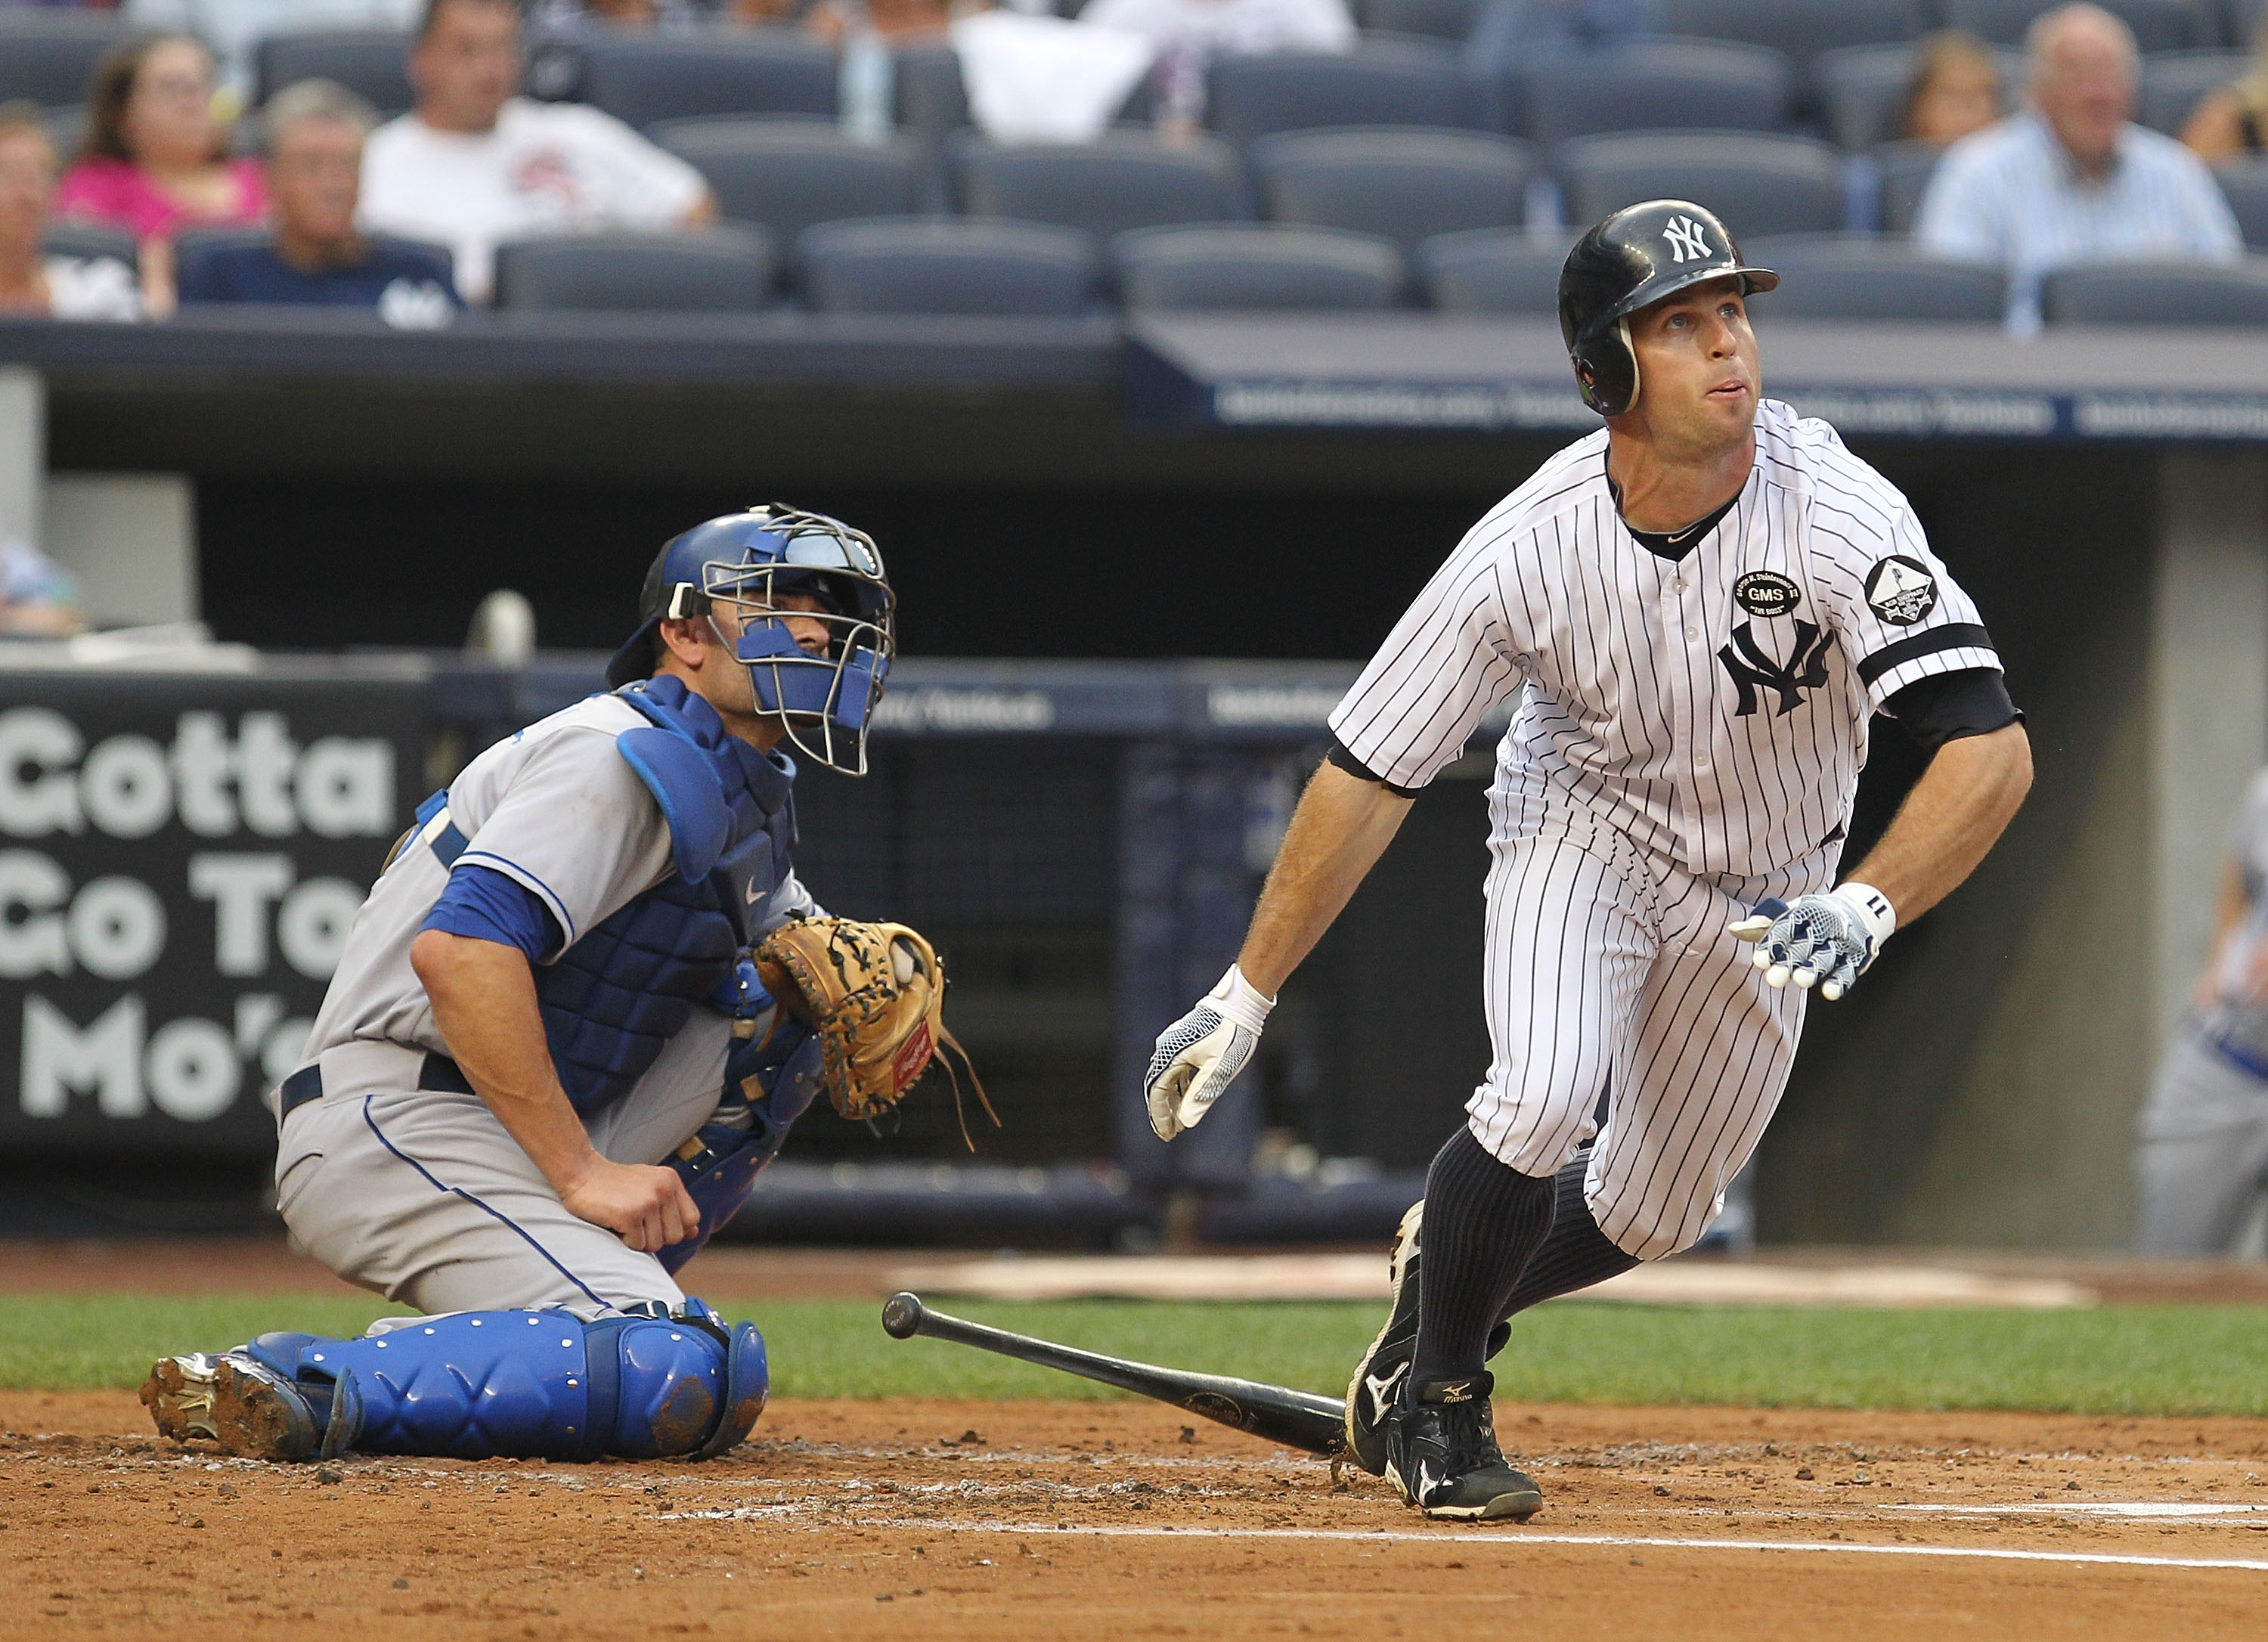 Brett Gardner is a professional Major League Baseball player with